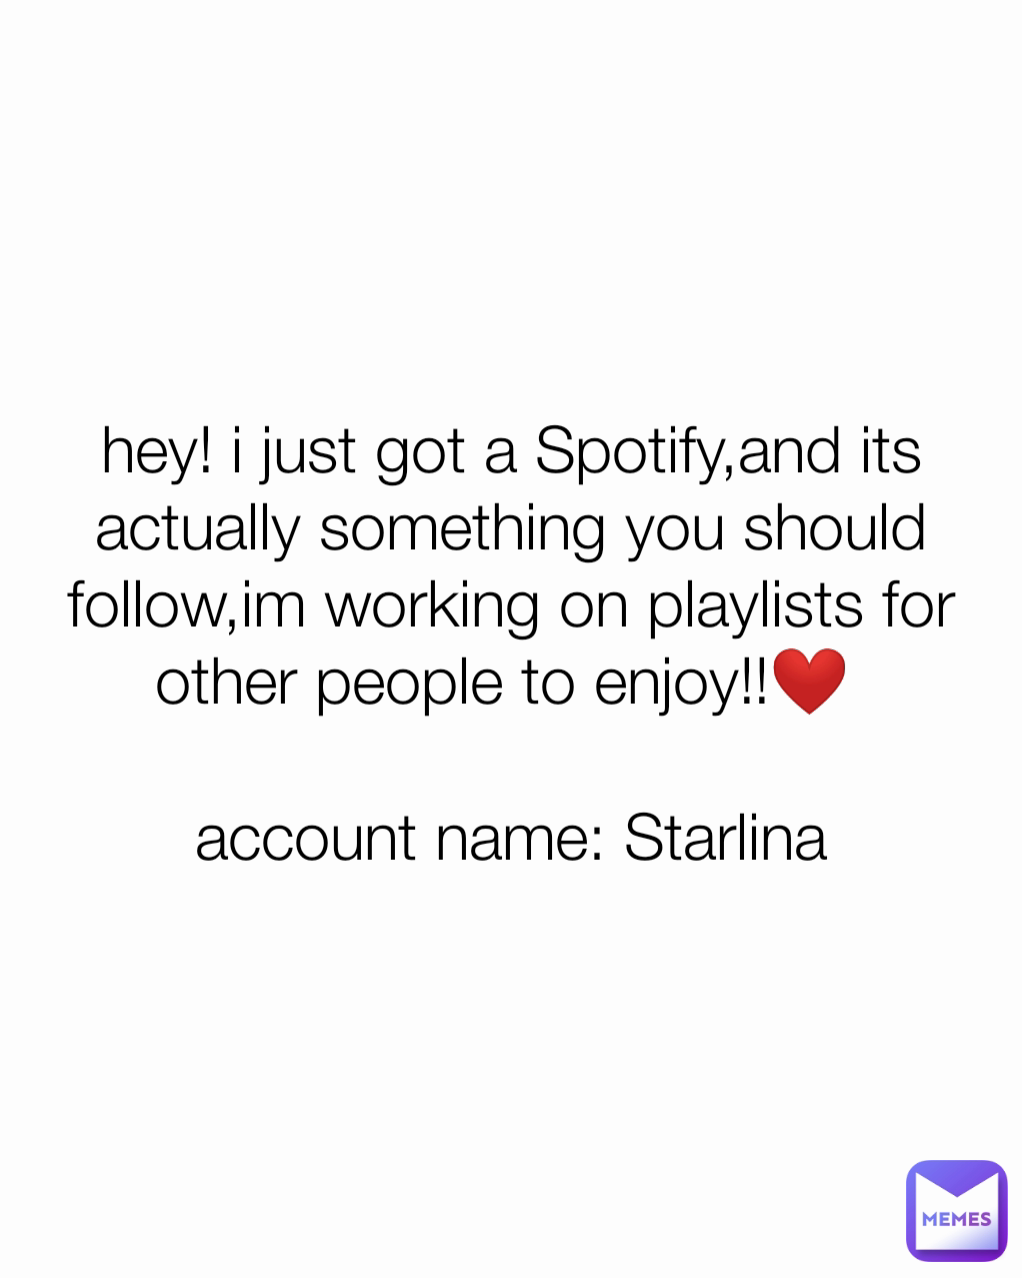 hey! i just got a Spotify,and its actually something you should follow,im working on playlists for other people to enjoy!!❤️ 

account name: Starlina